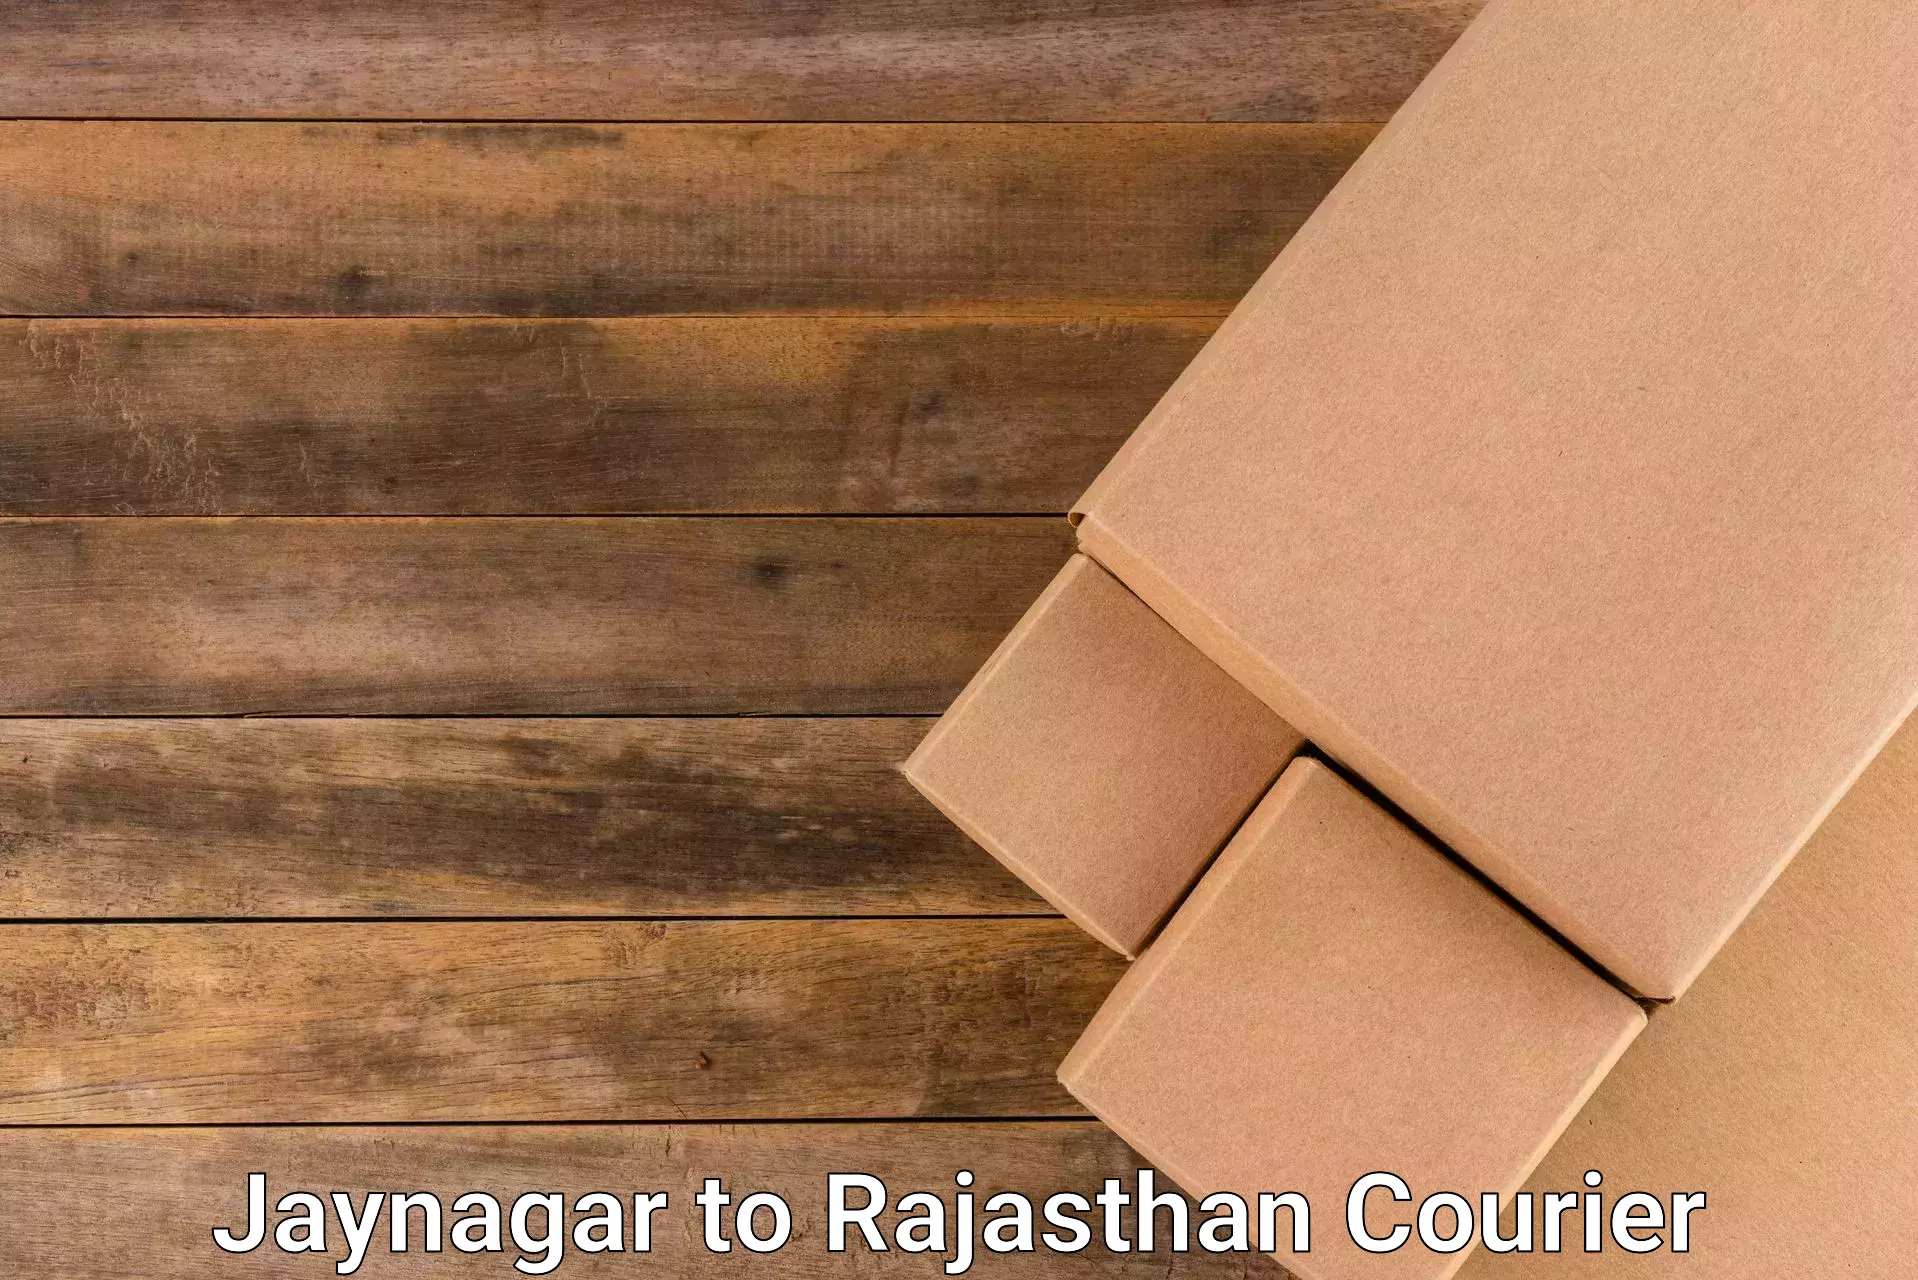 Reliable logistics providers Jaynagar to Yeswanthapur